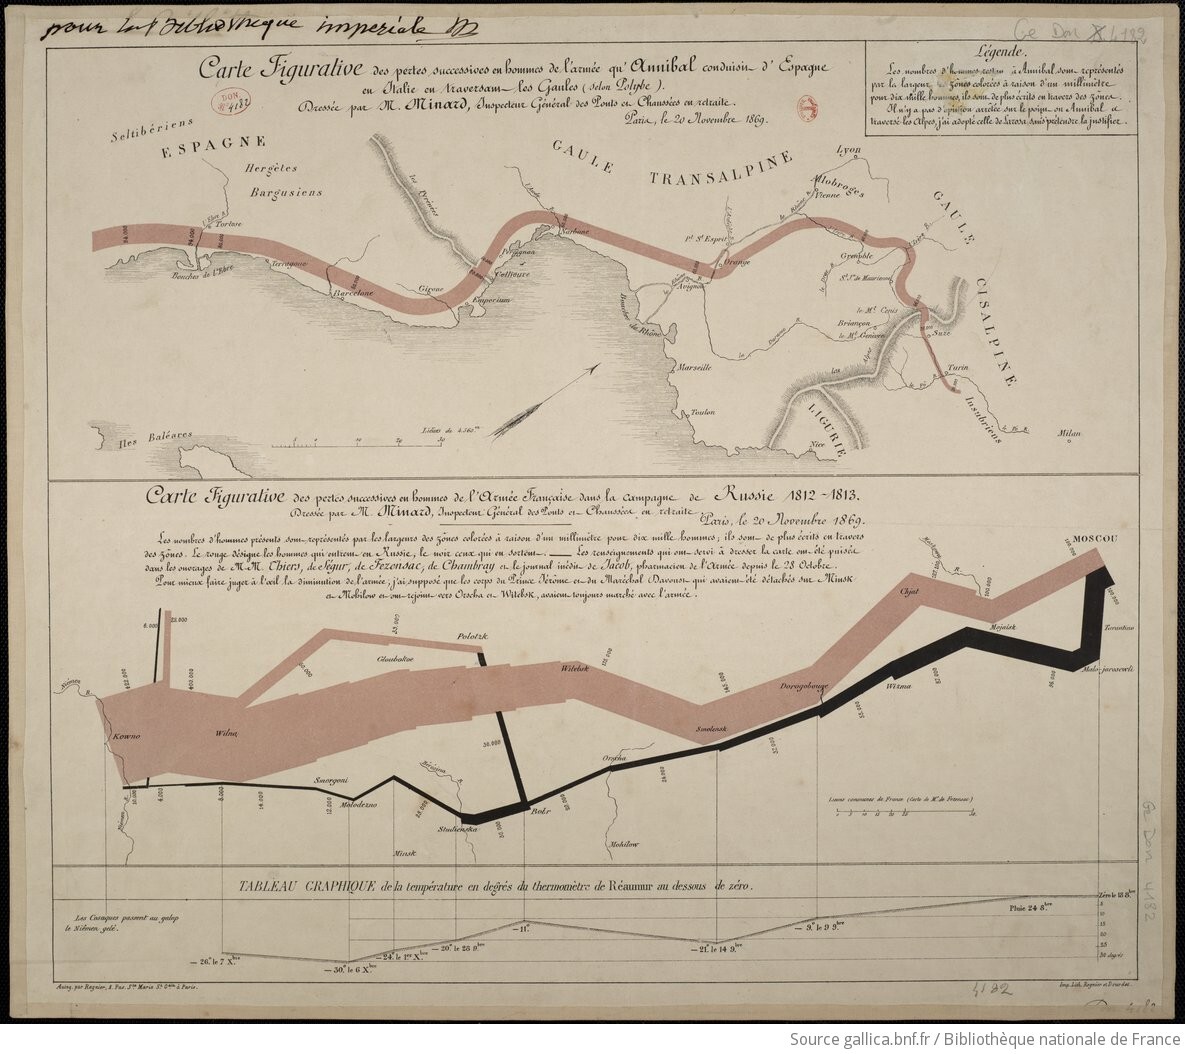 A line graph by Charles Minard inspired by Playfair. The graph’s descriptive text is in French. The title translates to “the losses of the French army in the Russian campaign from, 1812-1813.” Two thick horizontal lines dominate the graph. A beige line is thickest and top-most on the graph, decreasing in thickness as the line moves right, indicating movement across Russia. Underneath the beige line, a black line decreases in thickness as the line moves left, indicating retreating movement from Russia by Napoleon’s army. Both lines hit various peaks and valleys, but only intersect at “Polotsk.”